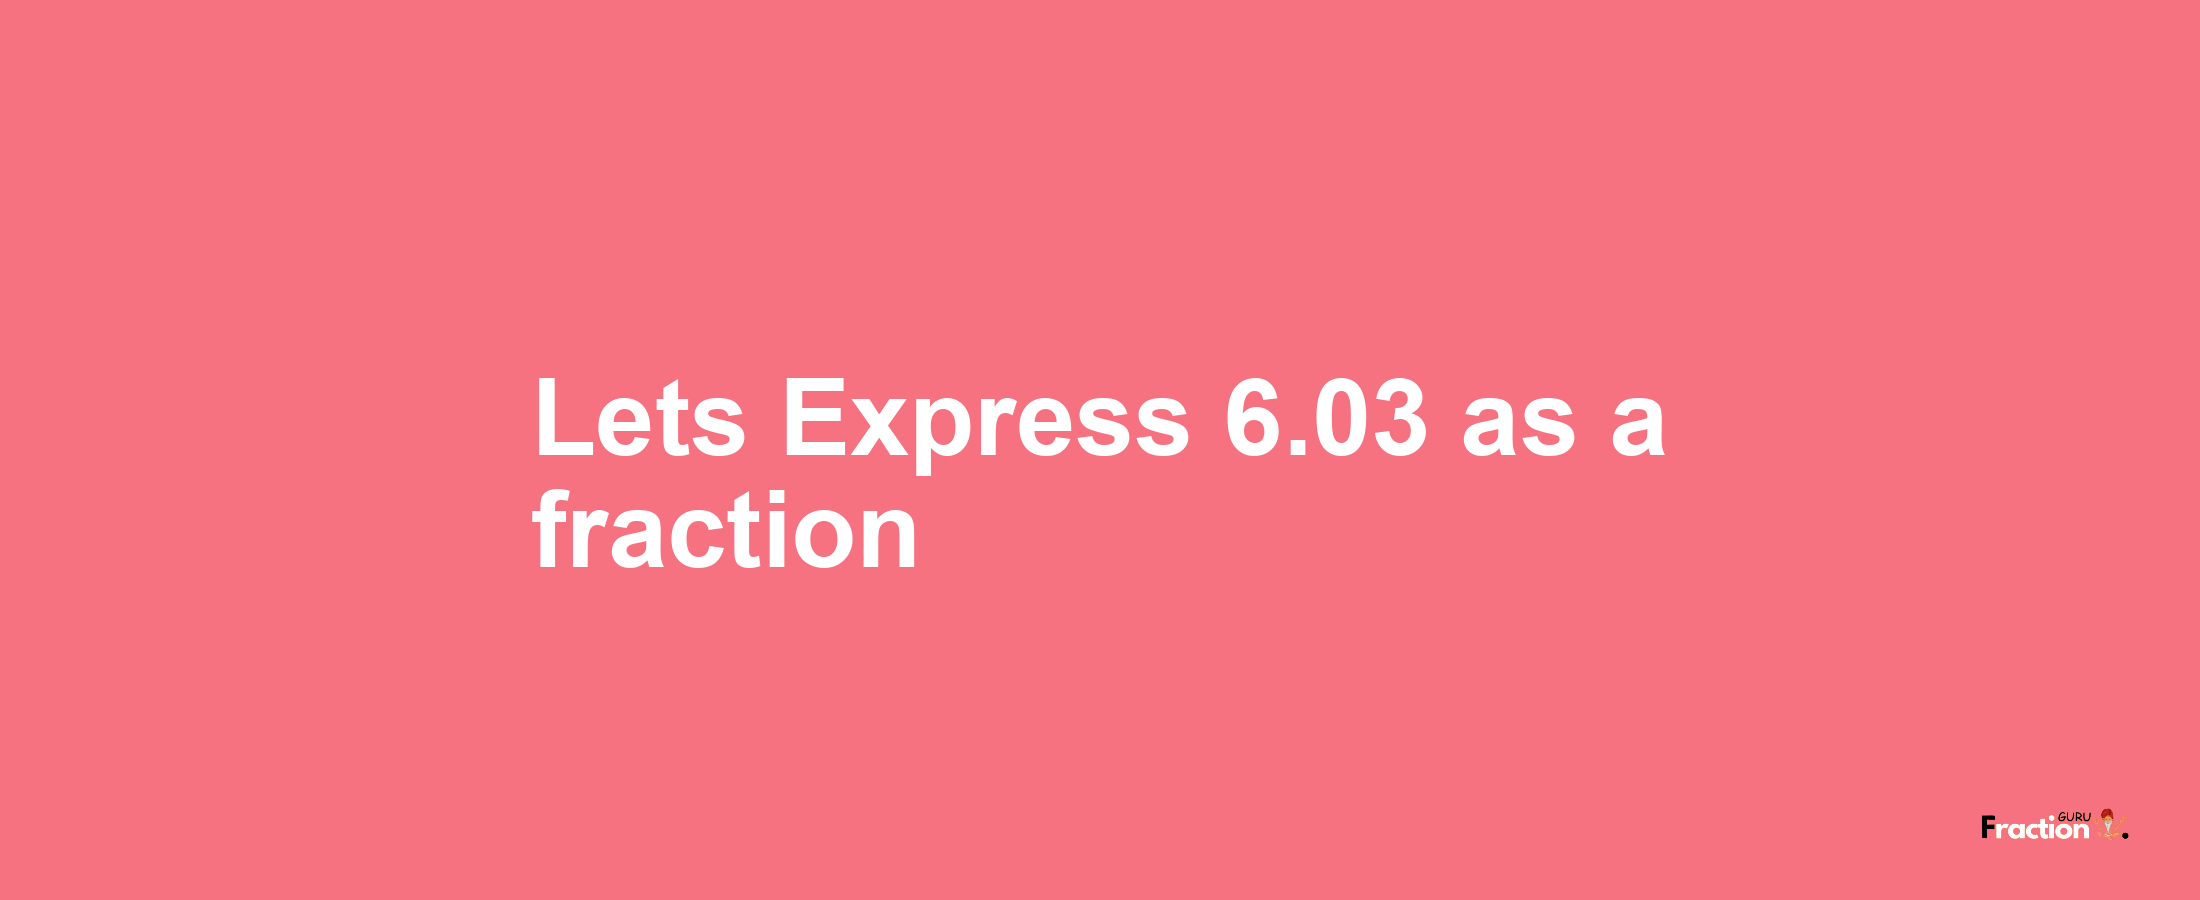 Lets Express 6.03 as afraction